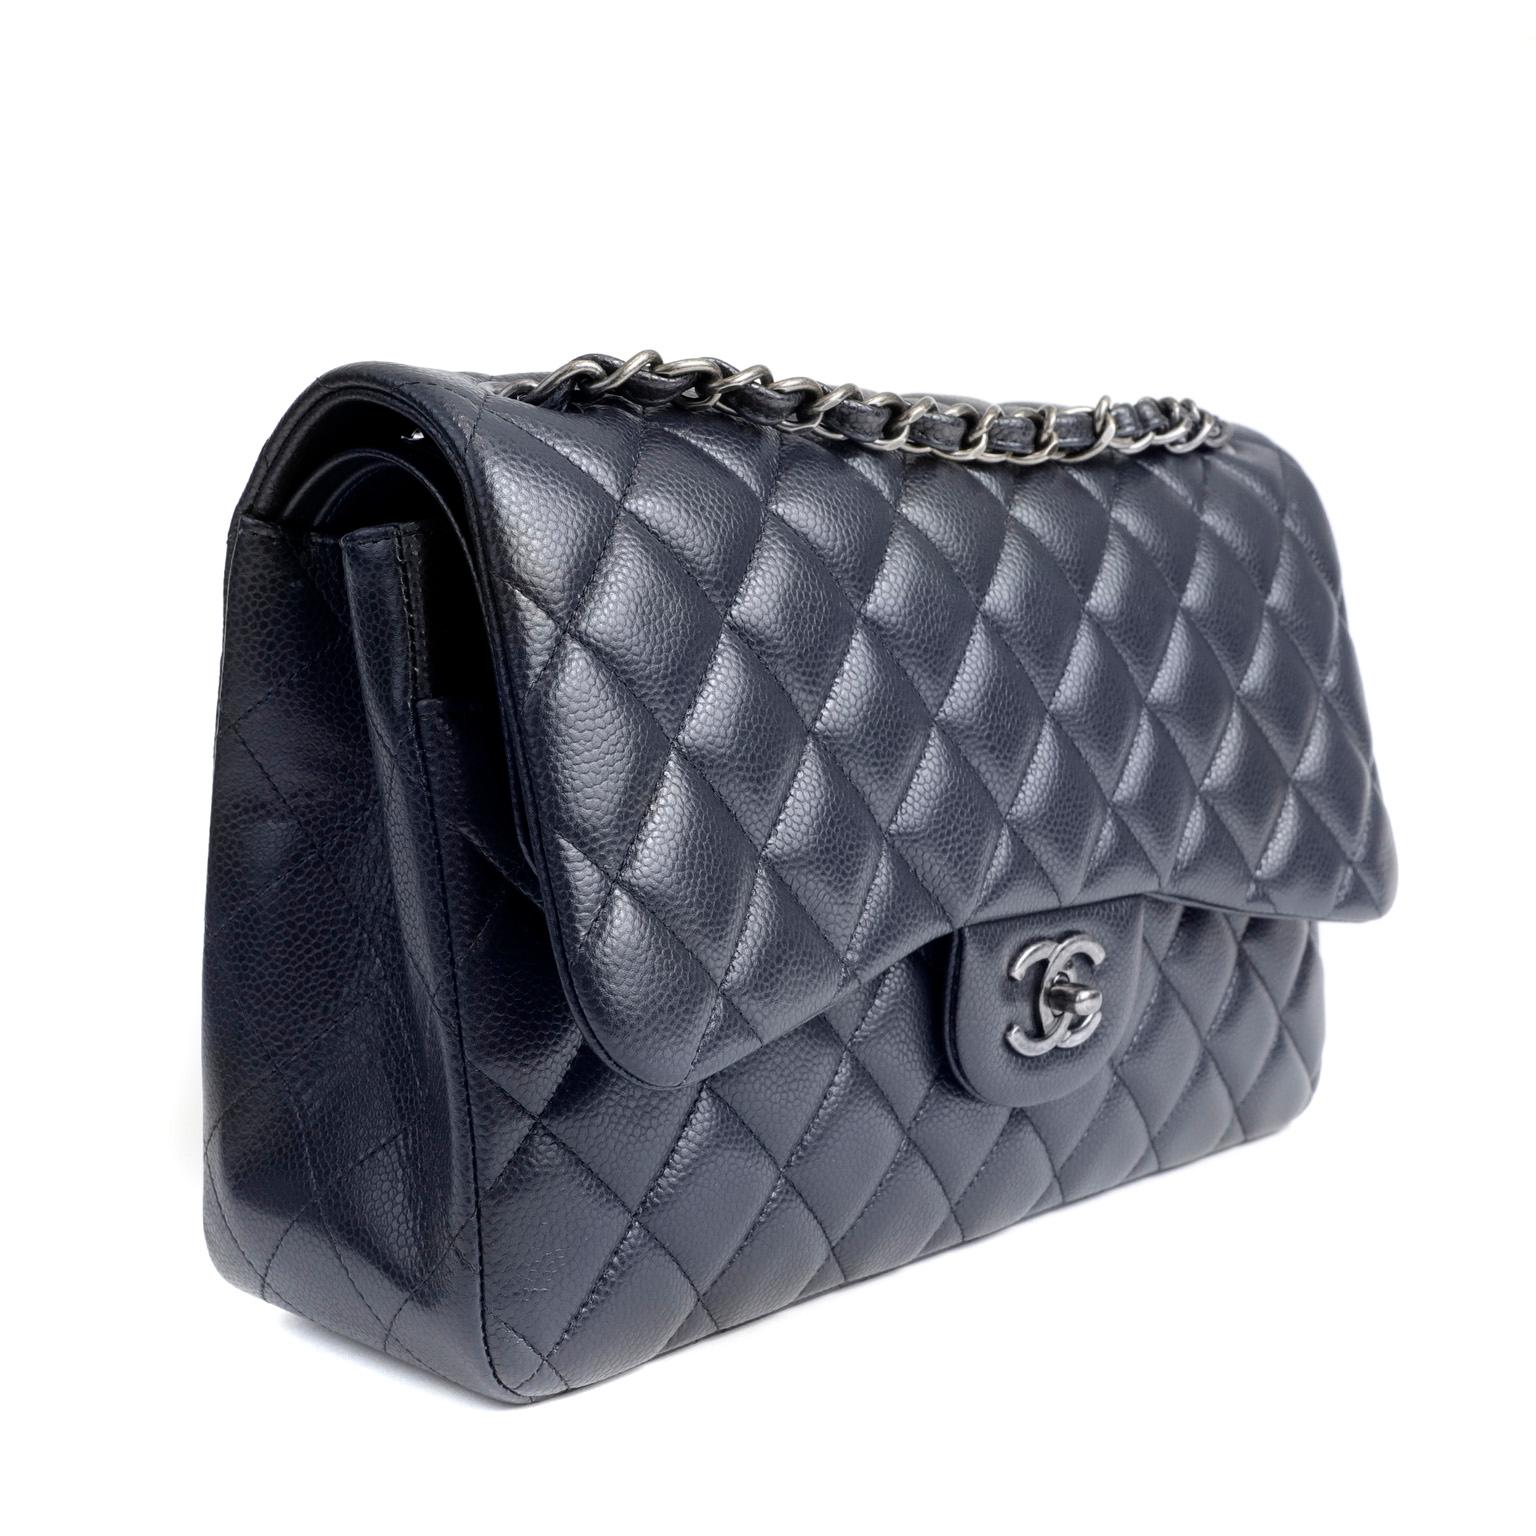 This authentic Chanel Navy Caviar Jumbo Classic Flap Bag is in pristine condition, appearing never carried.  A key piece in any sophisticated wardrobe, the Jumbo Classic is one of the most sought-after Chanel styles produced.
Durable and textured